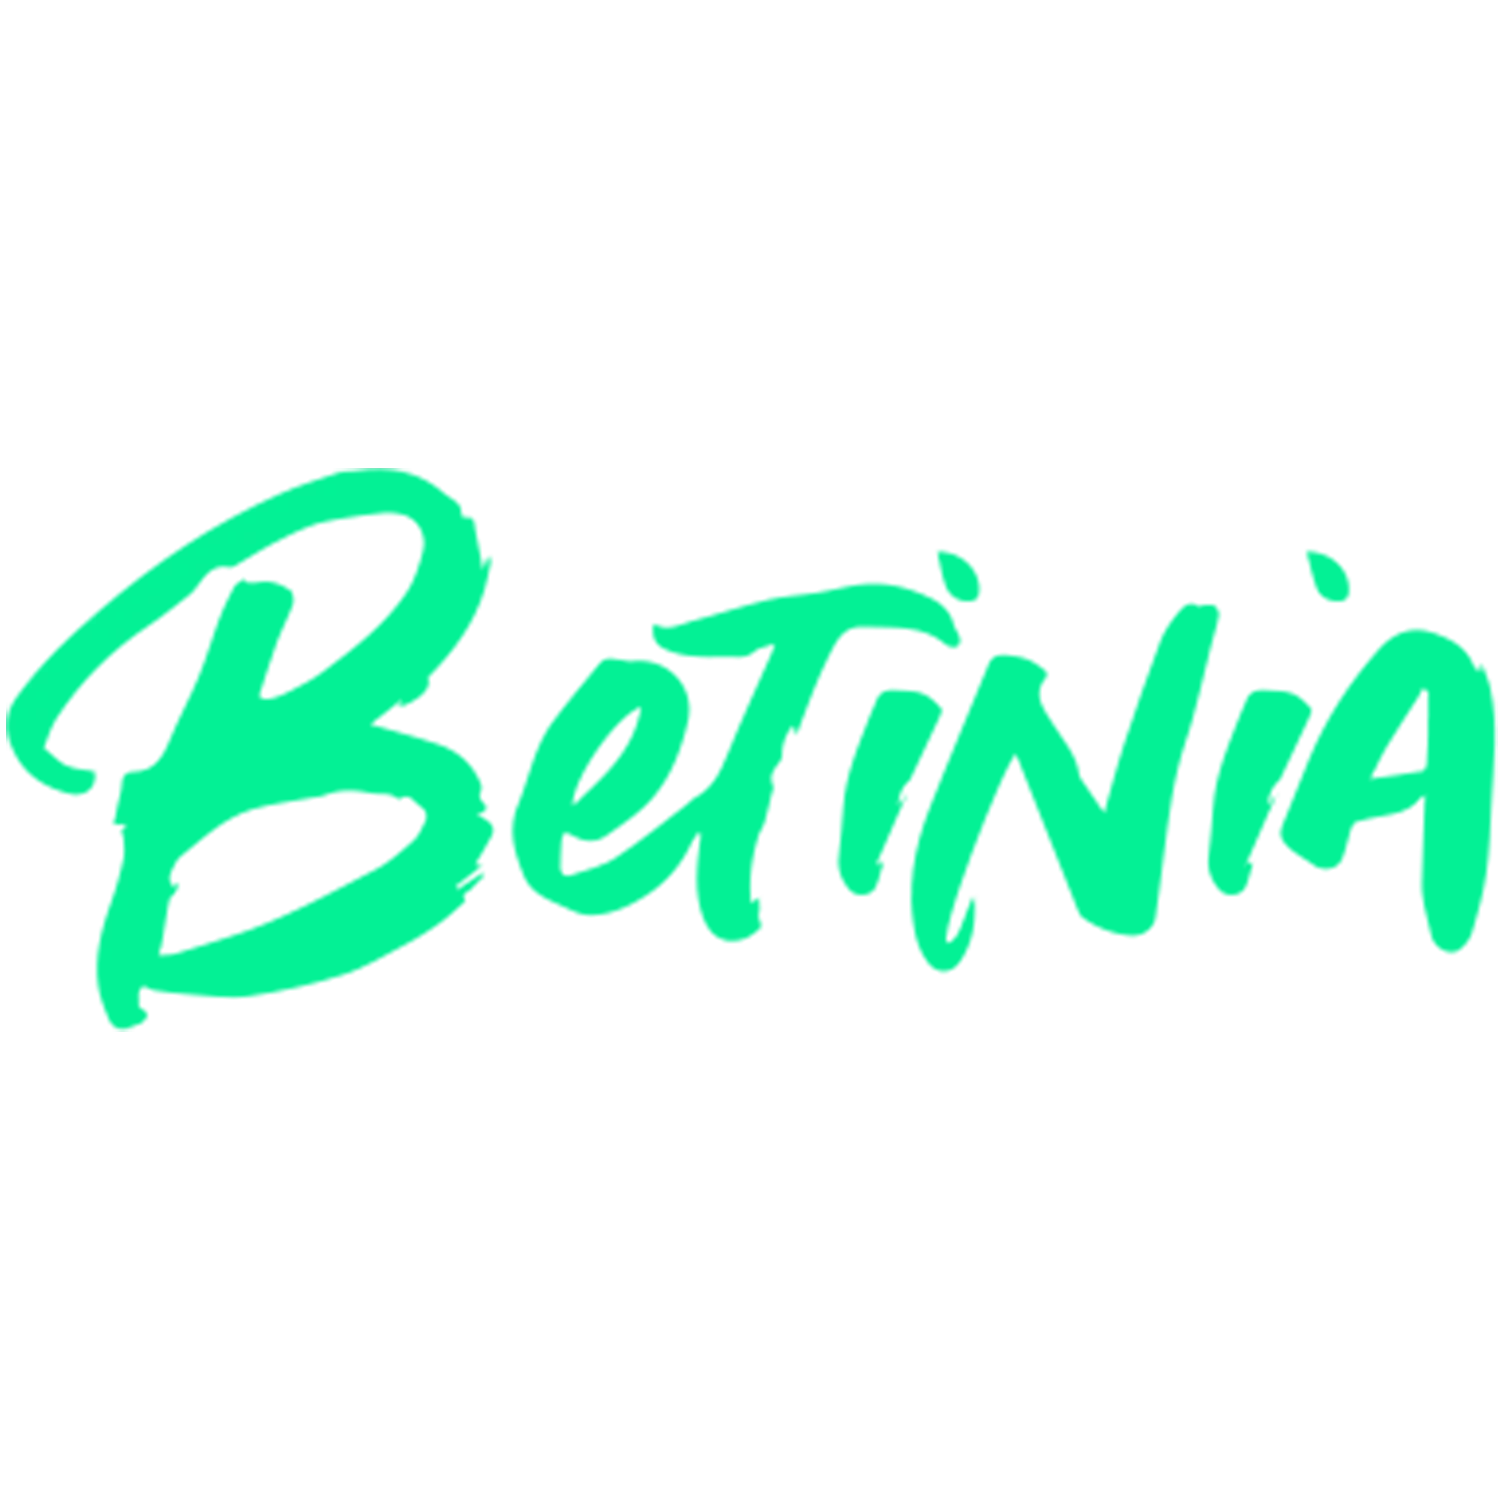 Betinia is legal in India for online cricket betting.